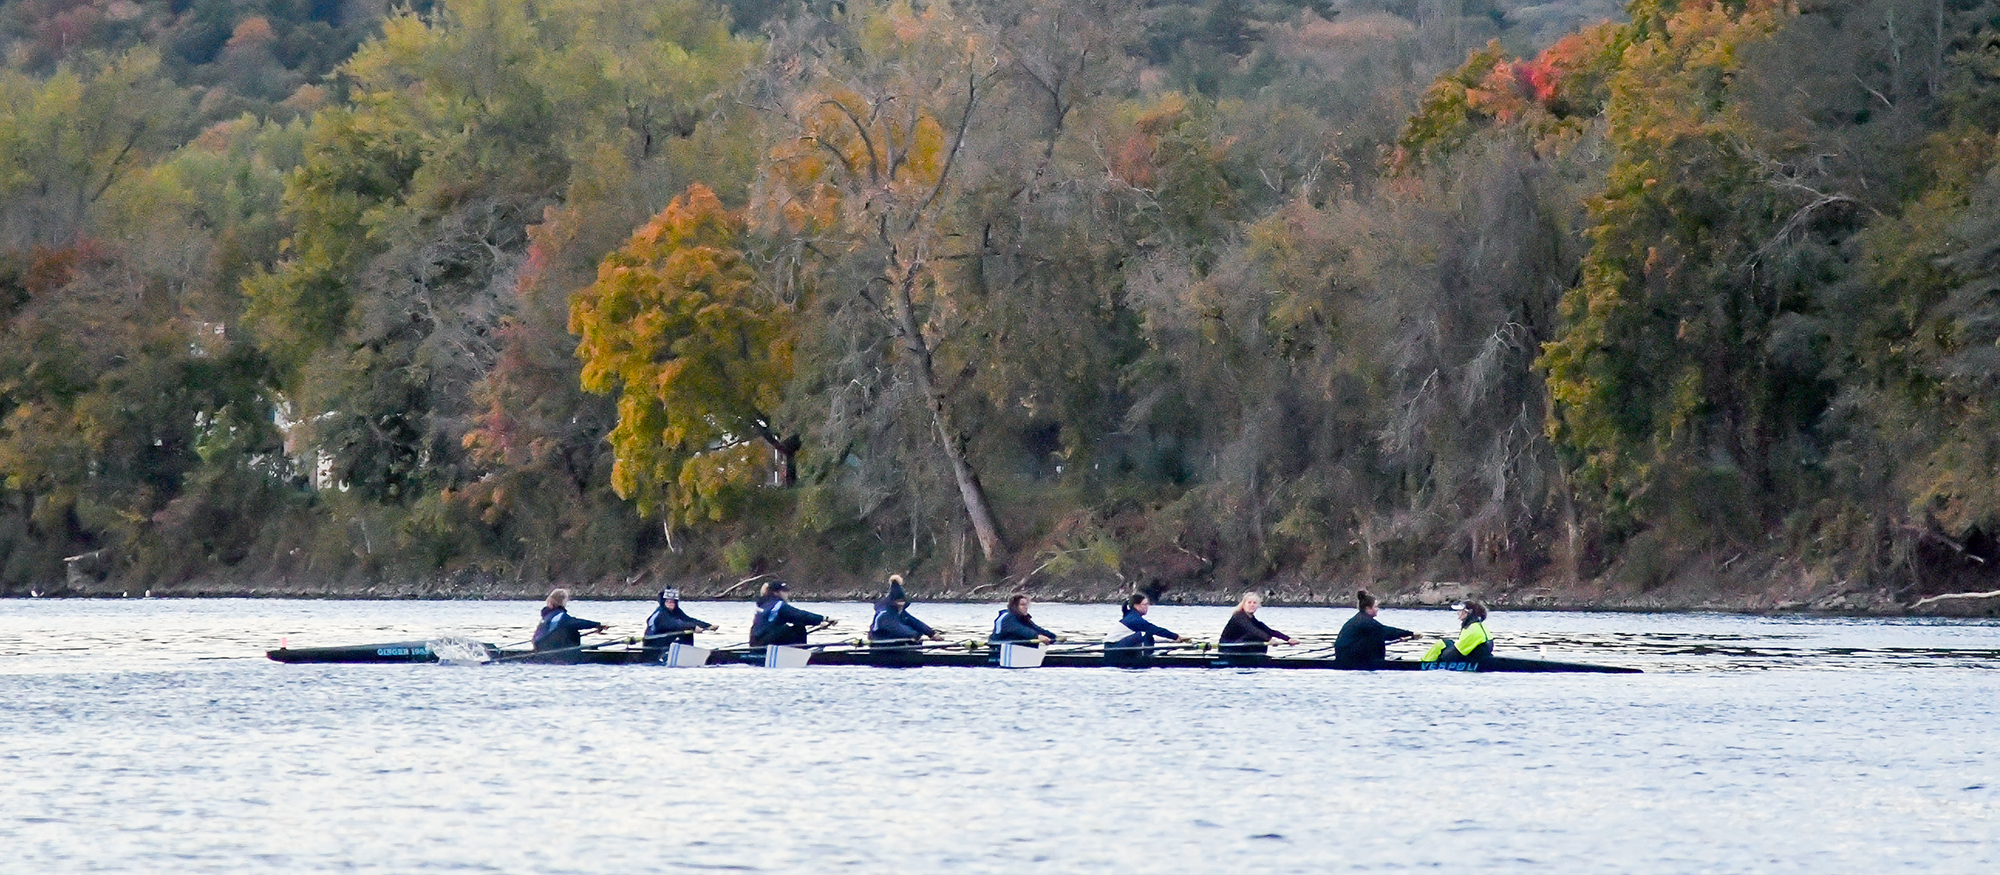 Action photo of the Lyons rowing team on the water of the Connecticut River.